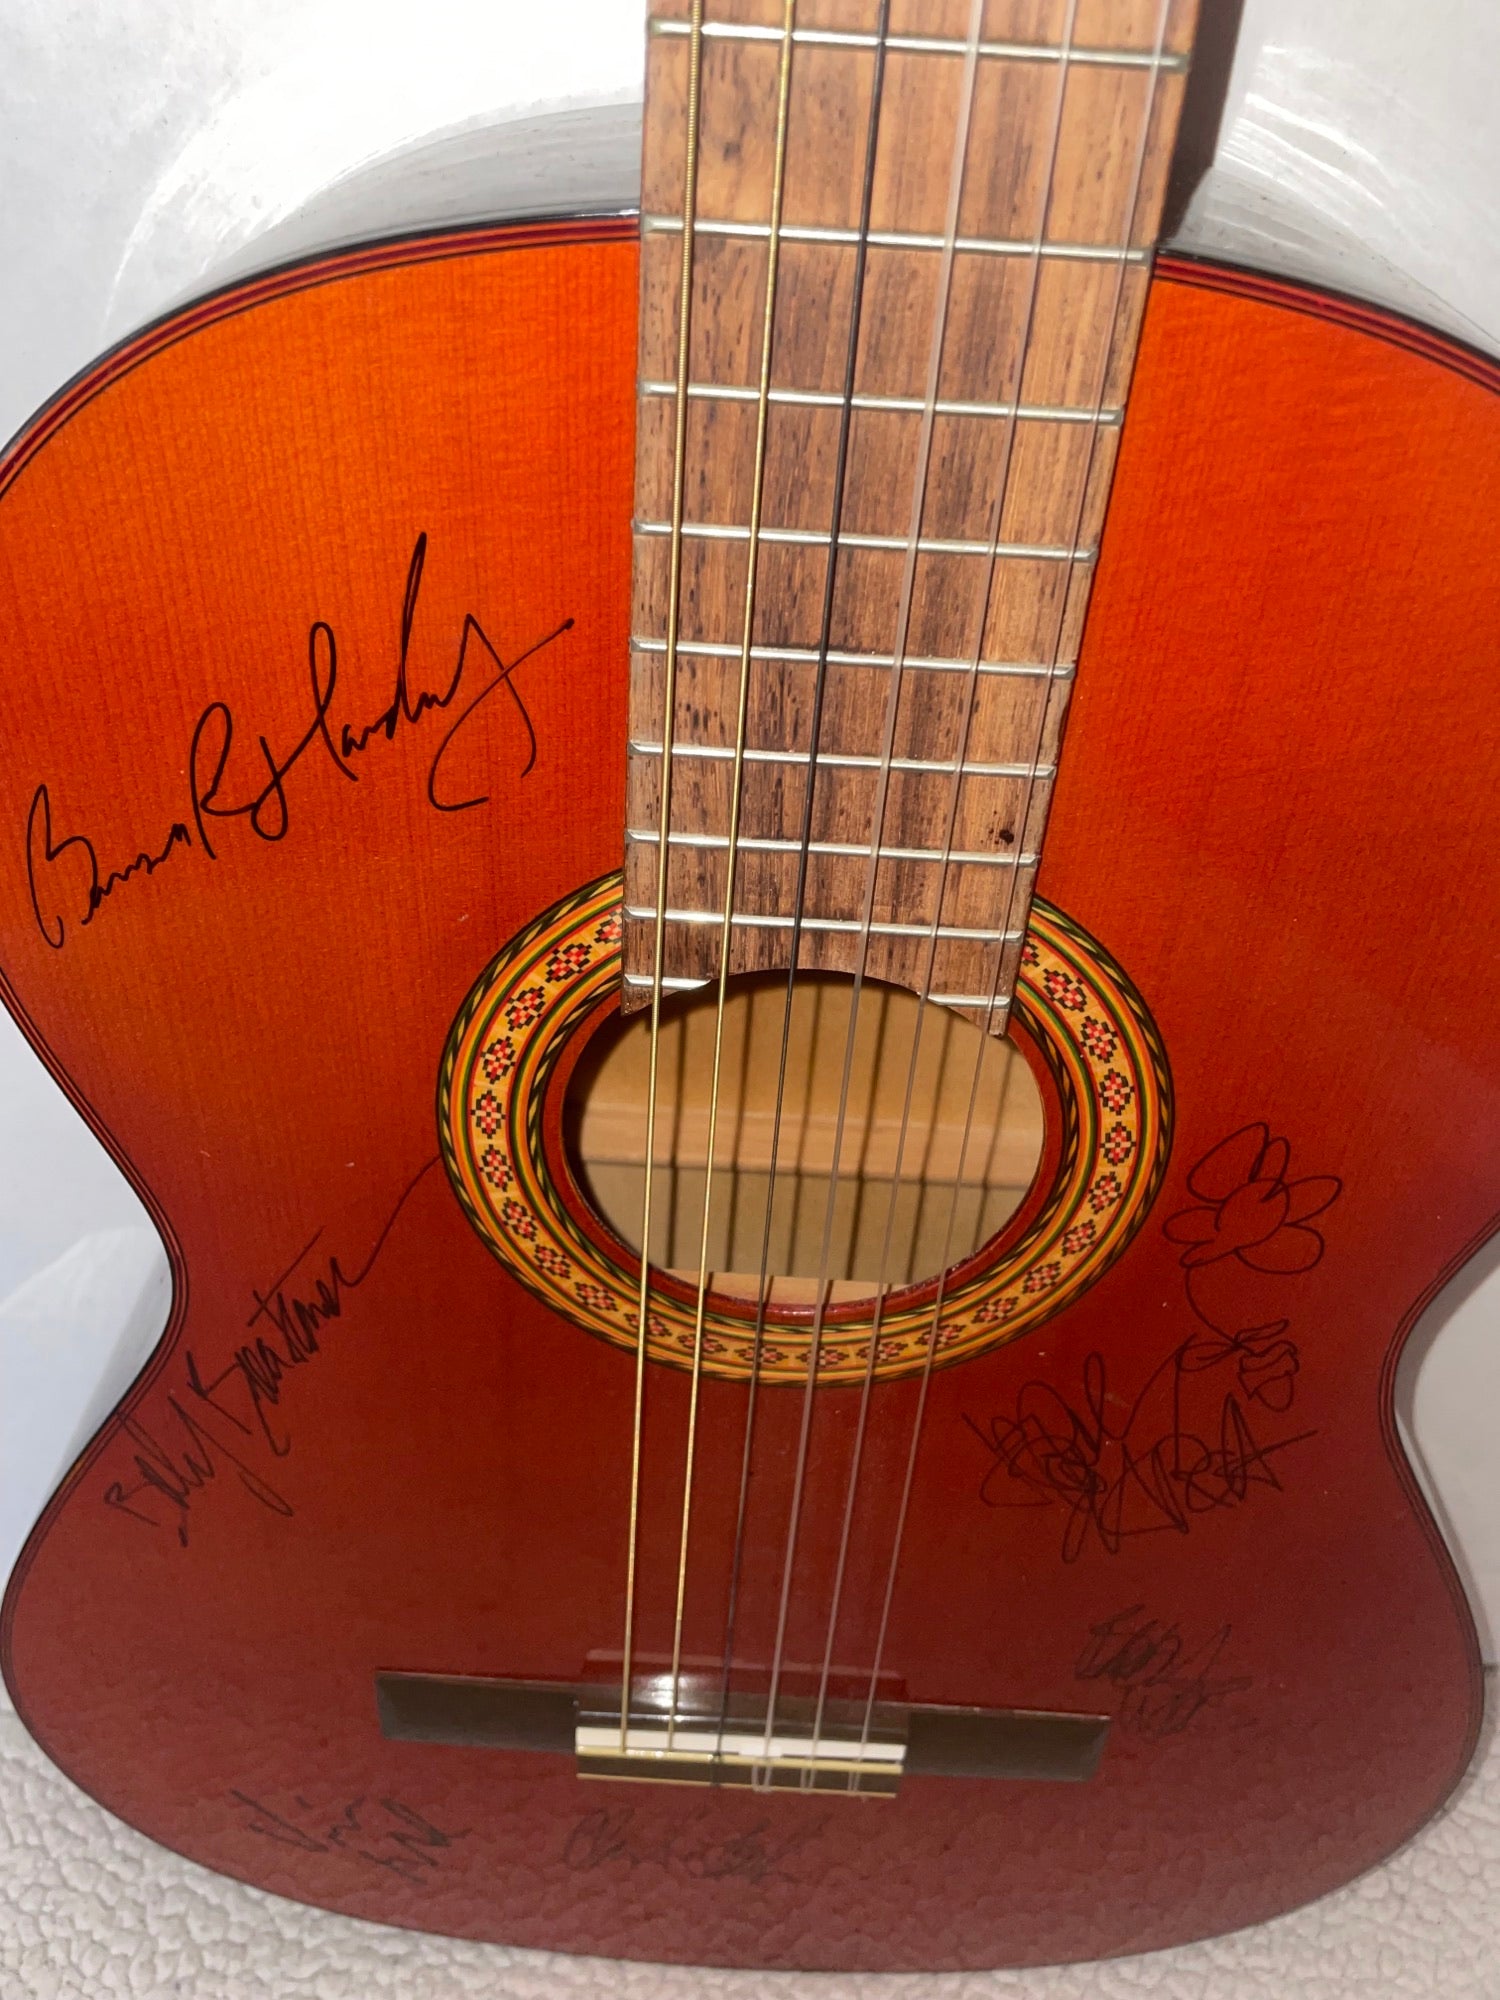 Jerry Garcia and the Grateful Dead acoustic guitar signed with proof